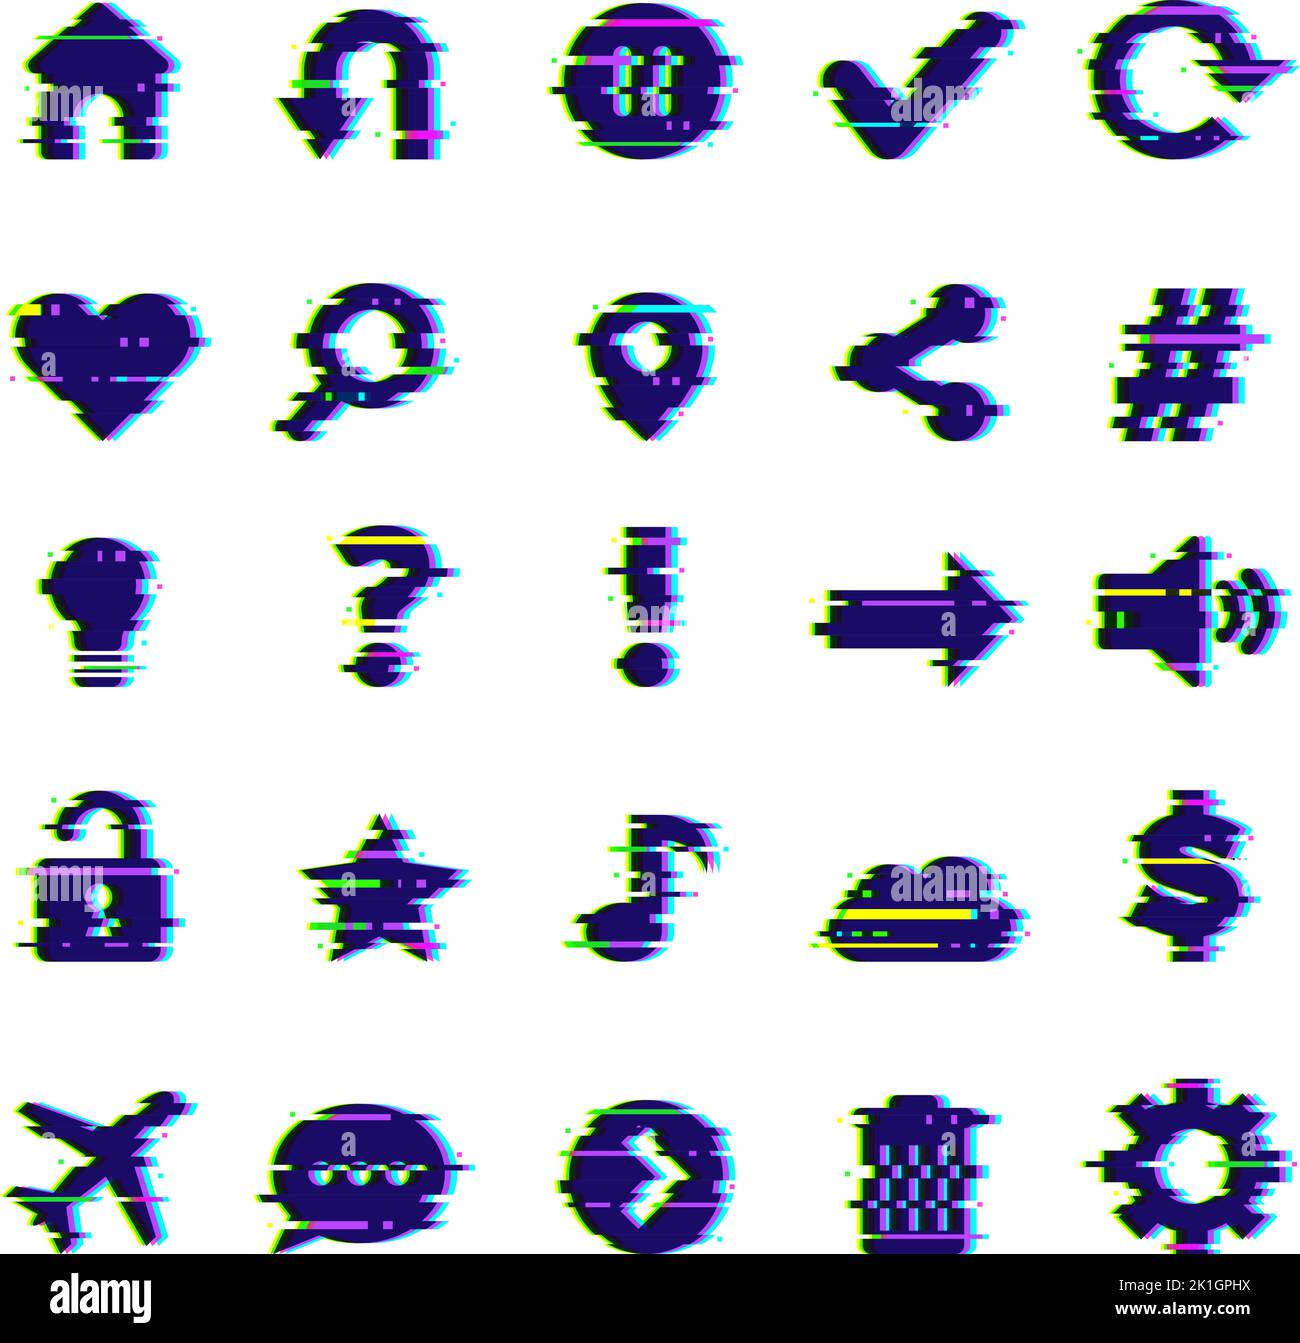 Web glitched symbols. Media grunge ui icons interface elements mobile app recent vector glitched template Stock Vector